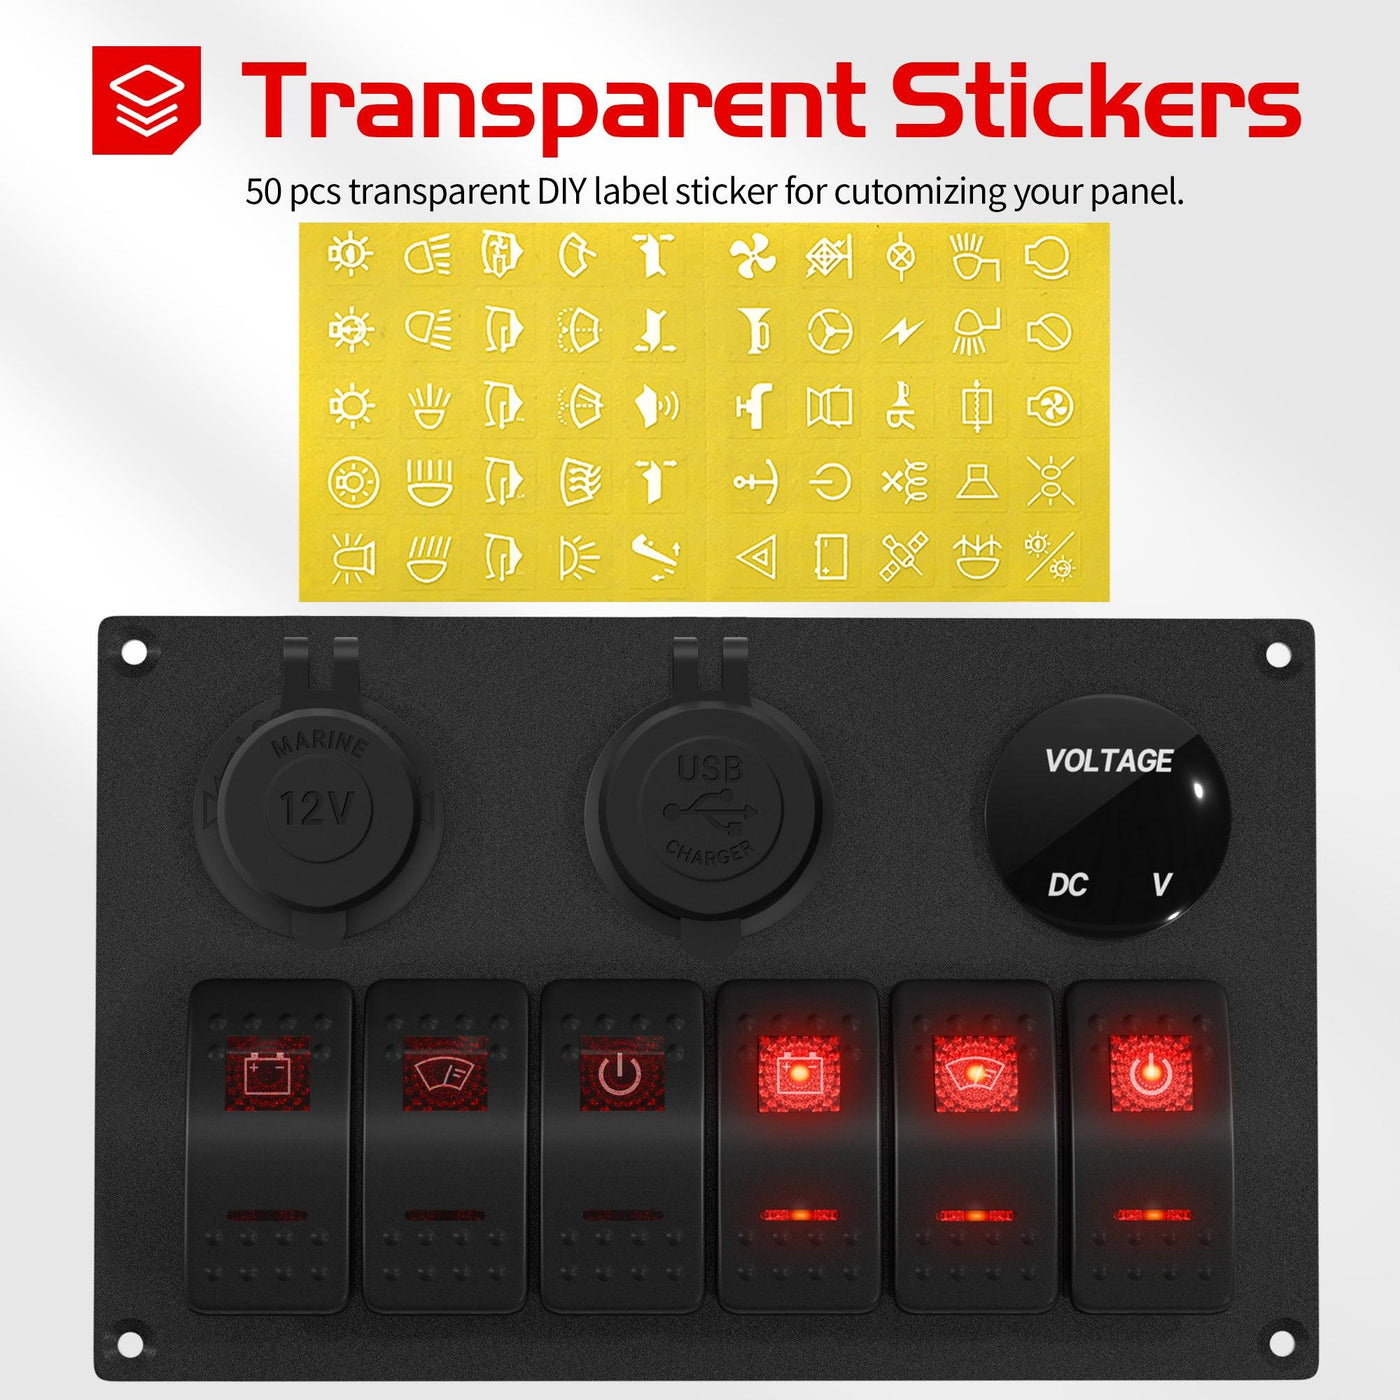 PN-L6S3-2-R 6 Gang Rocker Switch Panel with Transparent Stickers